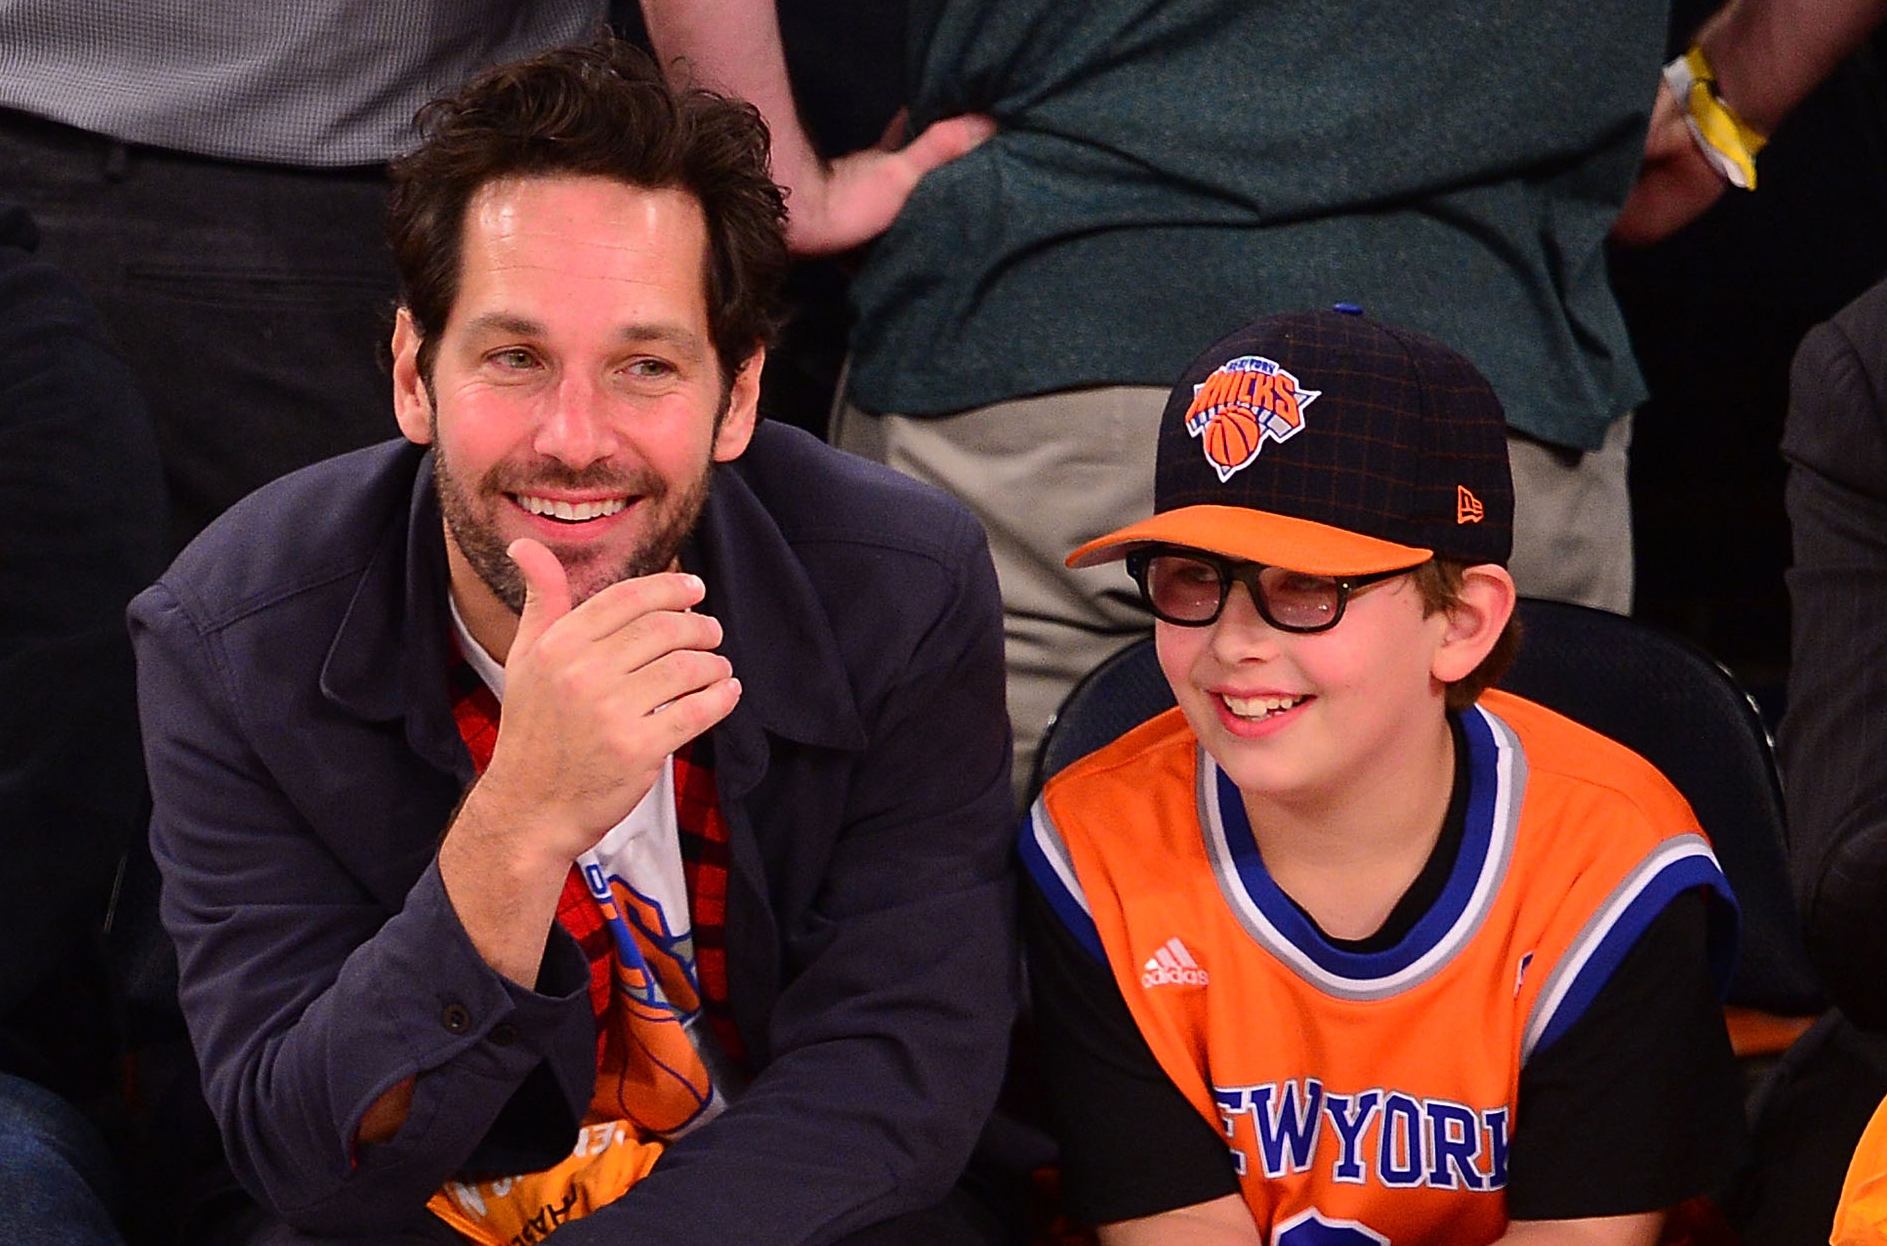 <p><span>"Ant-Man" star Paul Rudd and son Jack, who was about 9 at the time, sat courtside to watch the Milwaukee Bucks vs. the New York Knicks NBA game at Madison Square Garden in New York City in October 2013. Keep reading to see Jack at 16...</span> </p><p>MORE: <a href="https://www.wonderwall.com/celebrity/hollywood-stars-teens-and-tweens-kids-children-all-grown-up-529788.gallery">See celebs' teens and tweens as little kids vs. now</a></p>